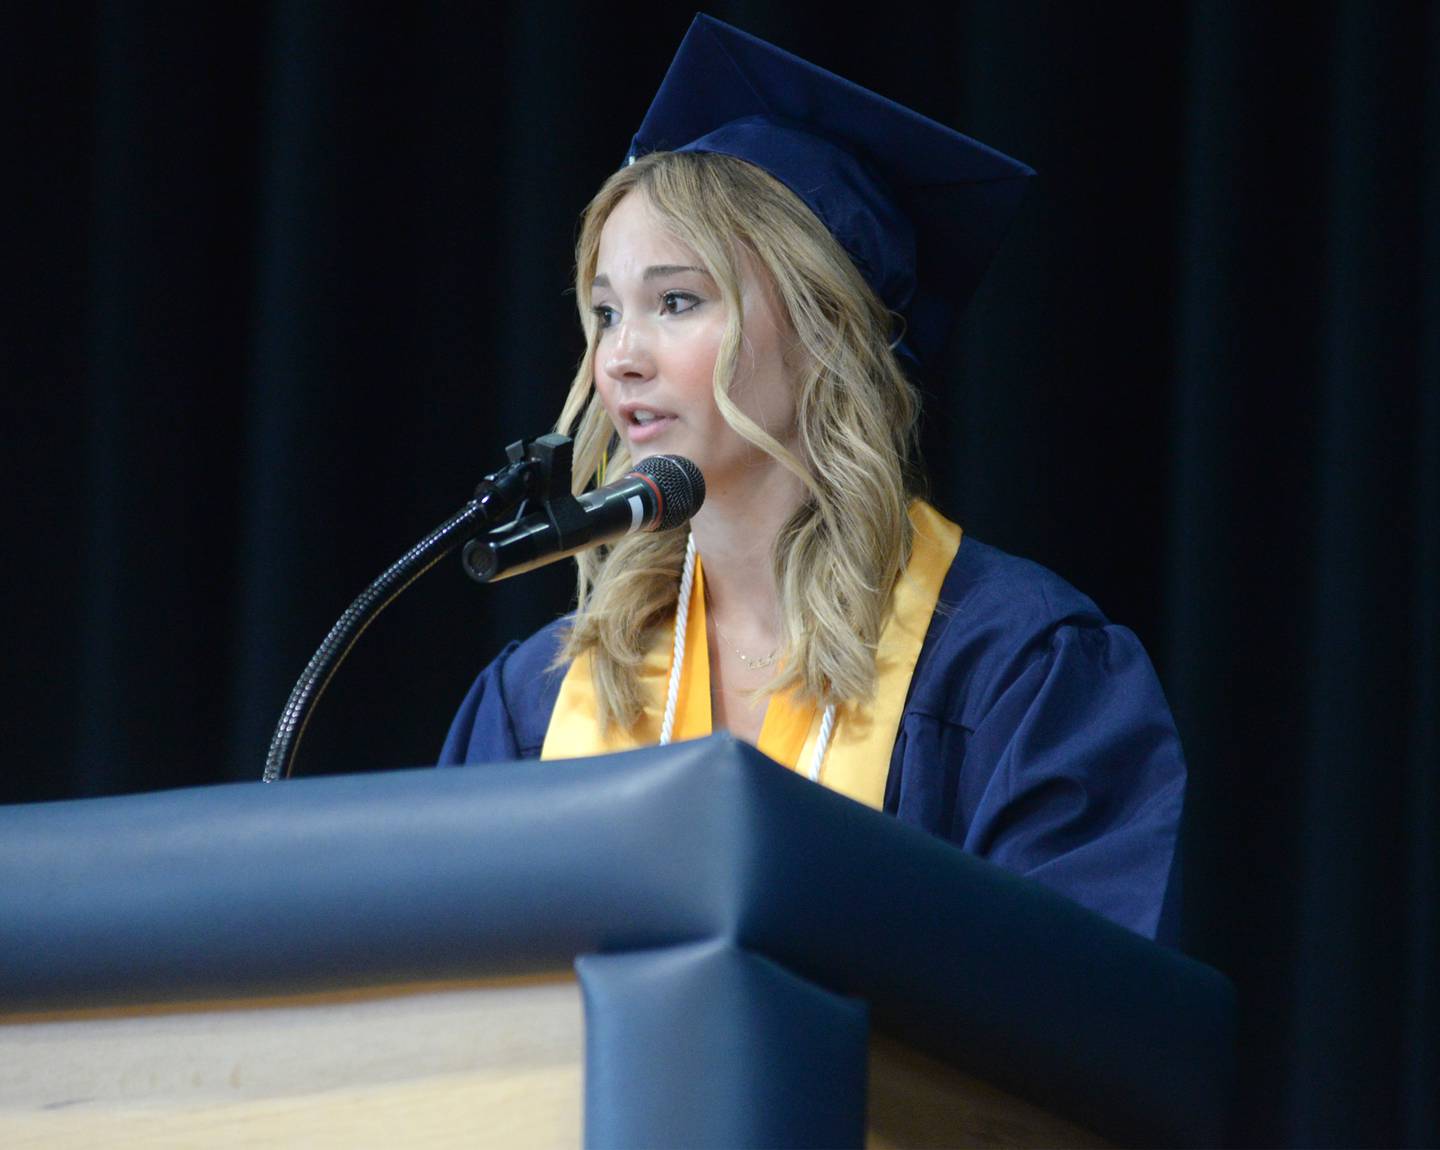 Rebekah Zeigler, valedictorian, gave the senior class remarks at Polo High School's commencement on Sunday, May 21.